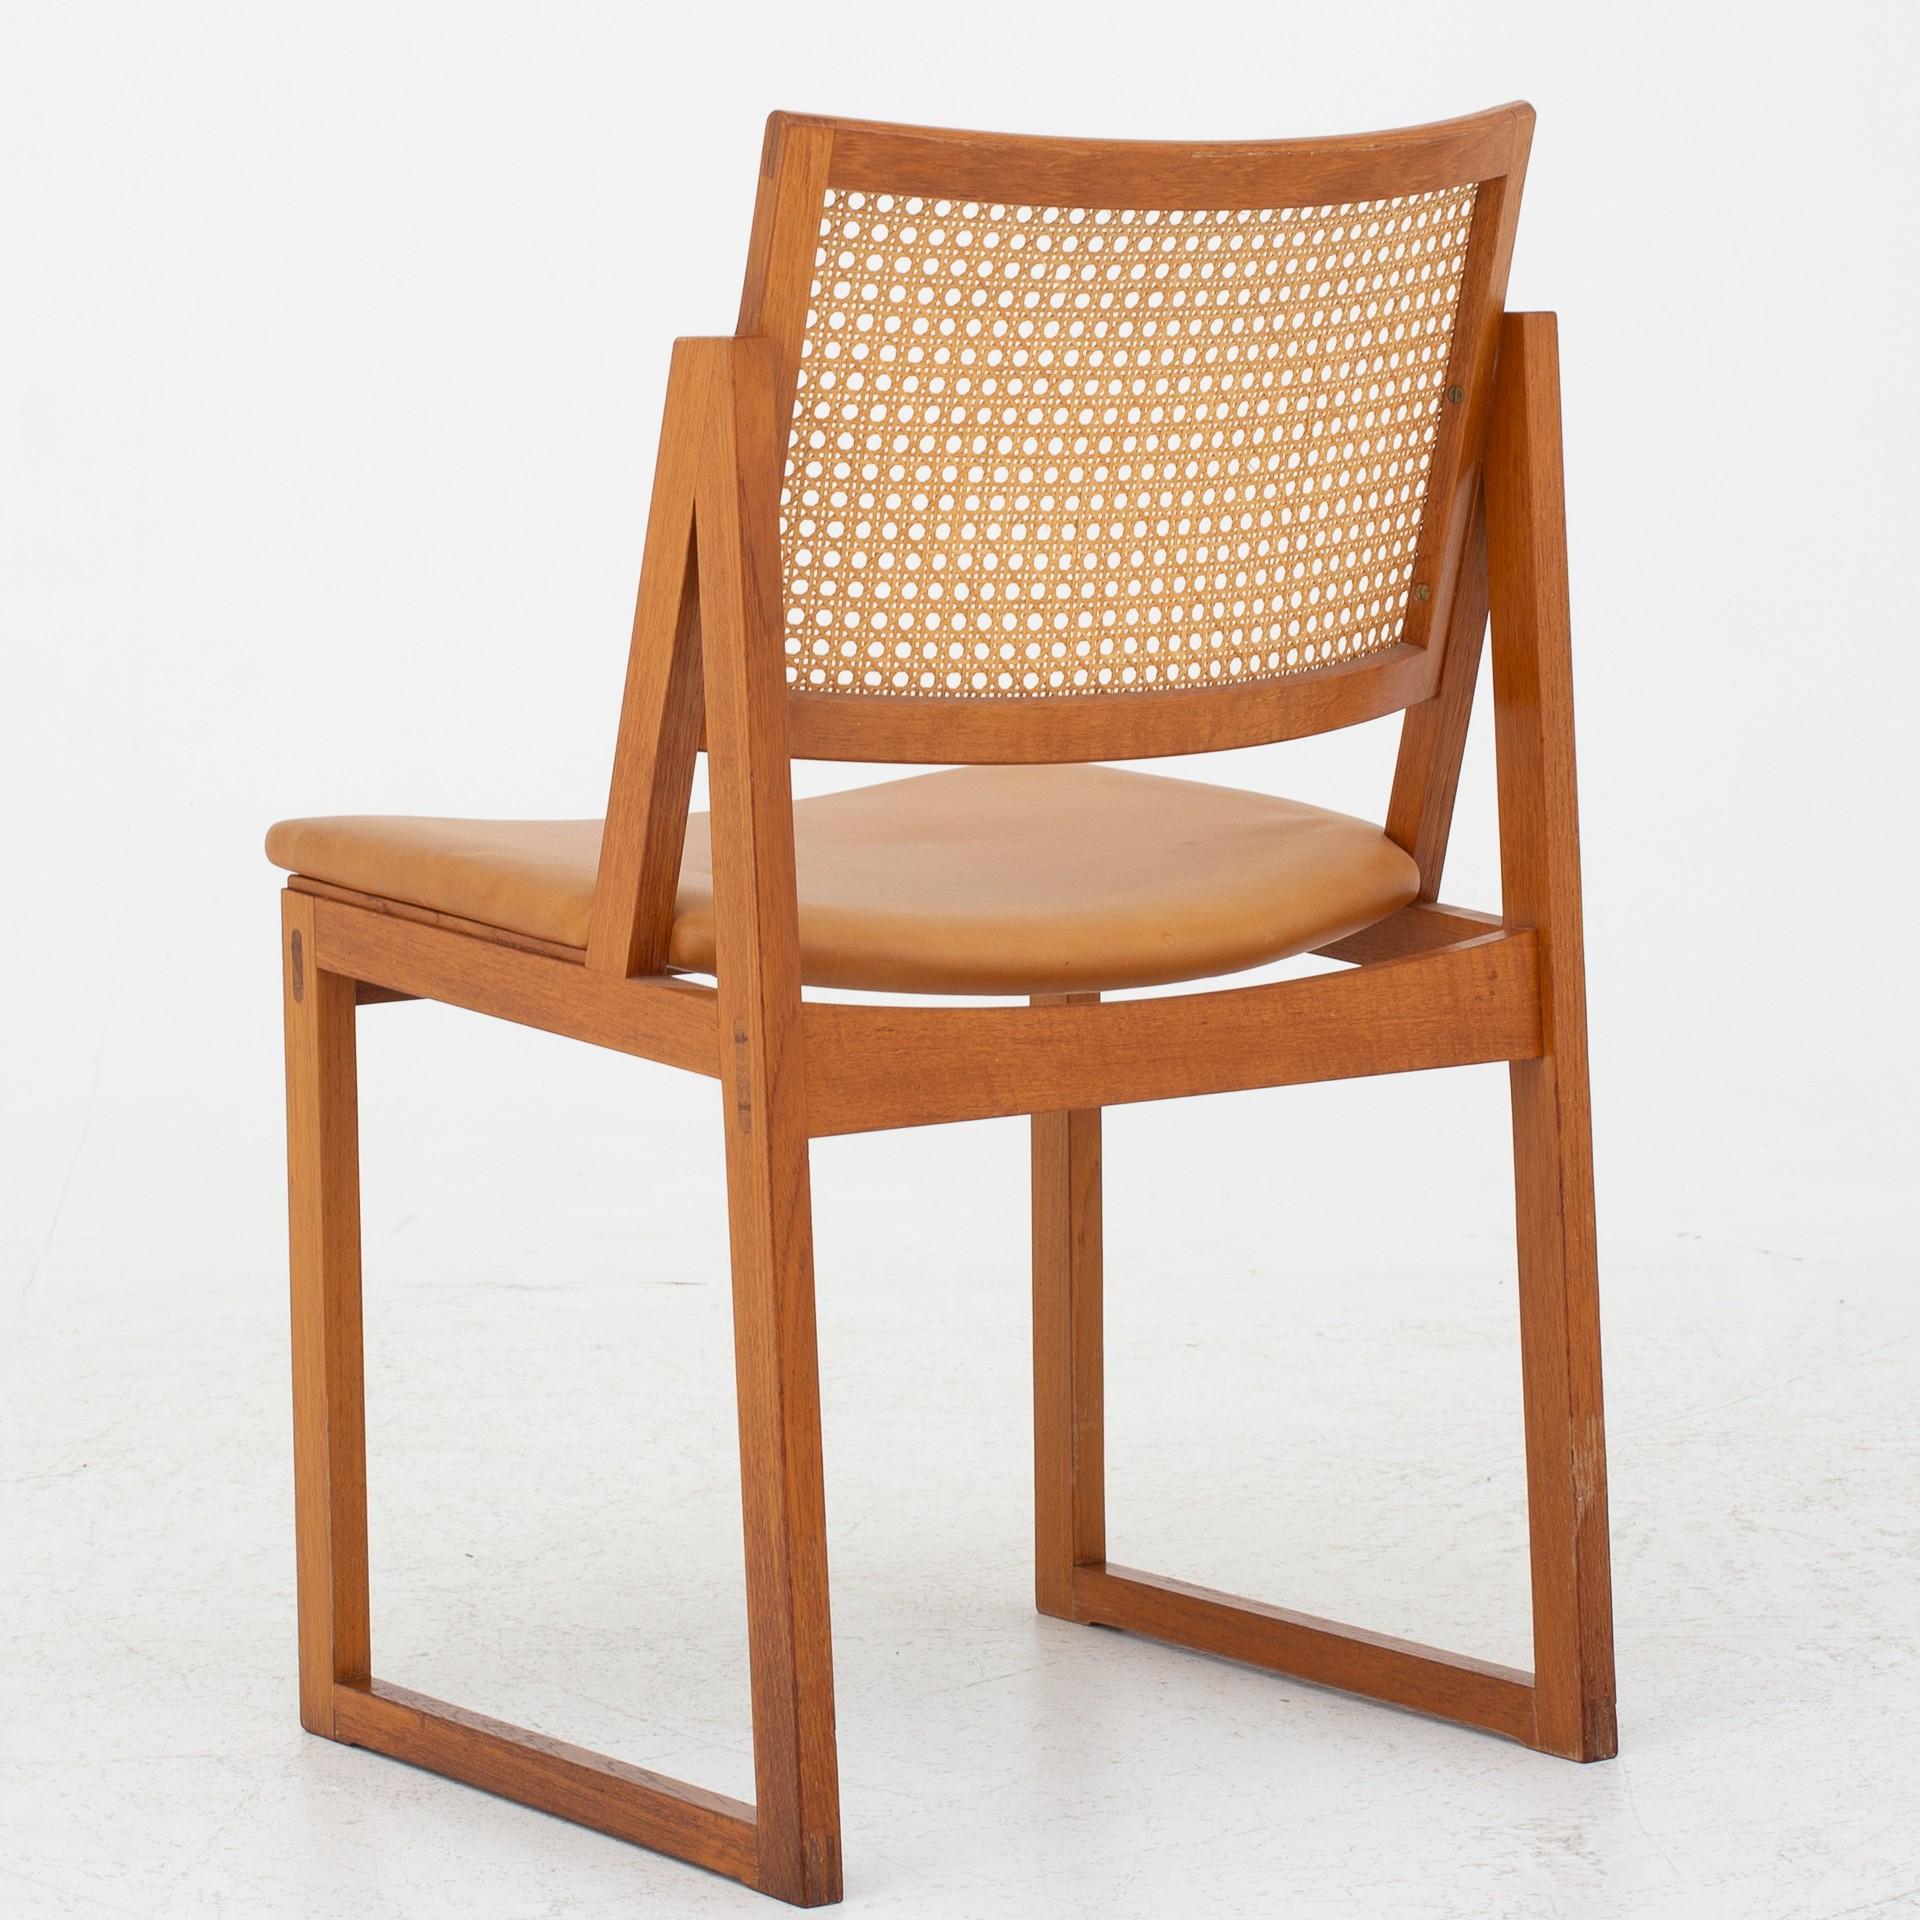 Six dining chairs in mahogany and rattan with leather seat. Maker Søborg Møbelfabrik.